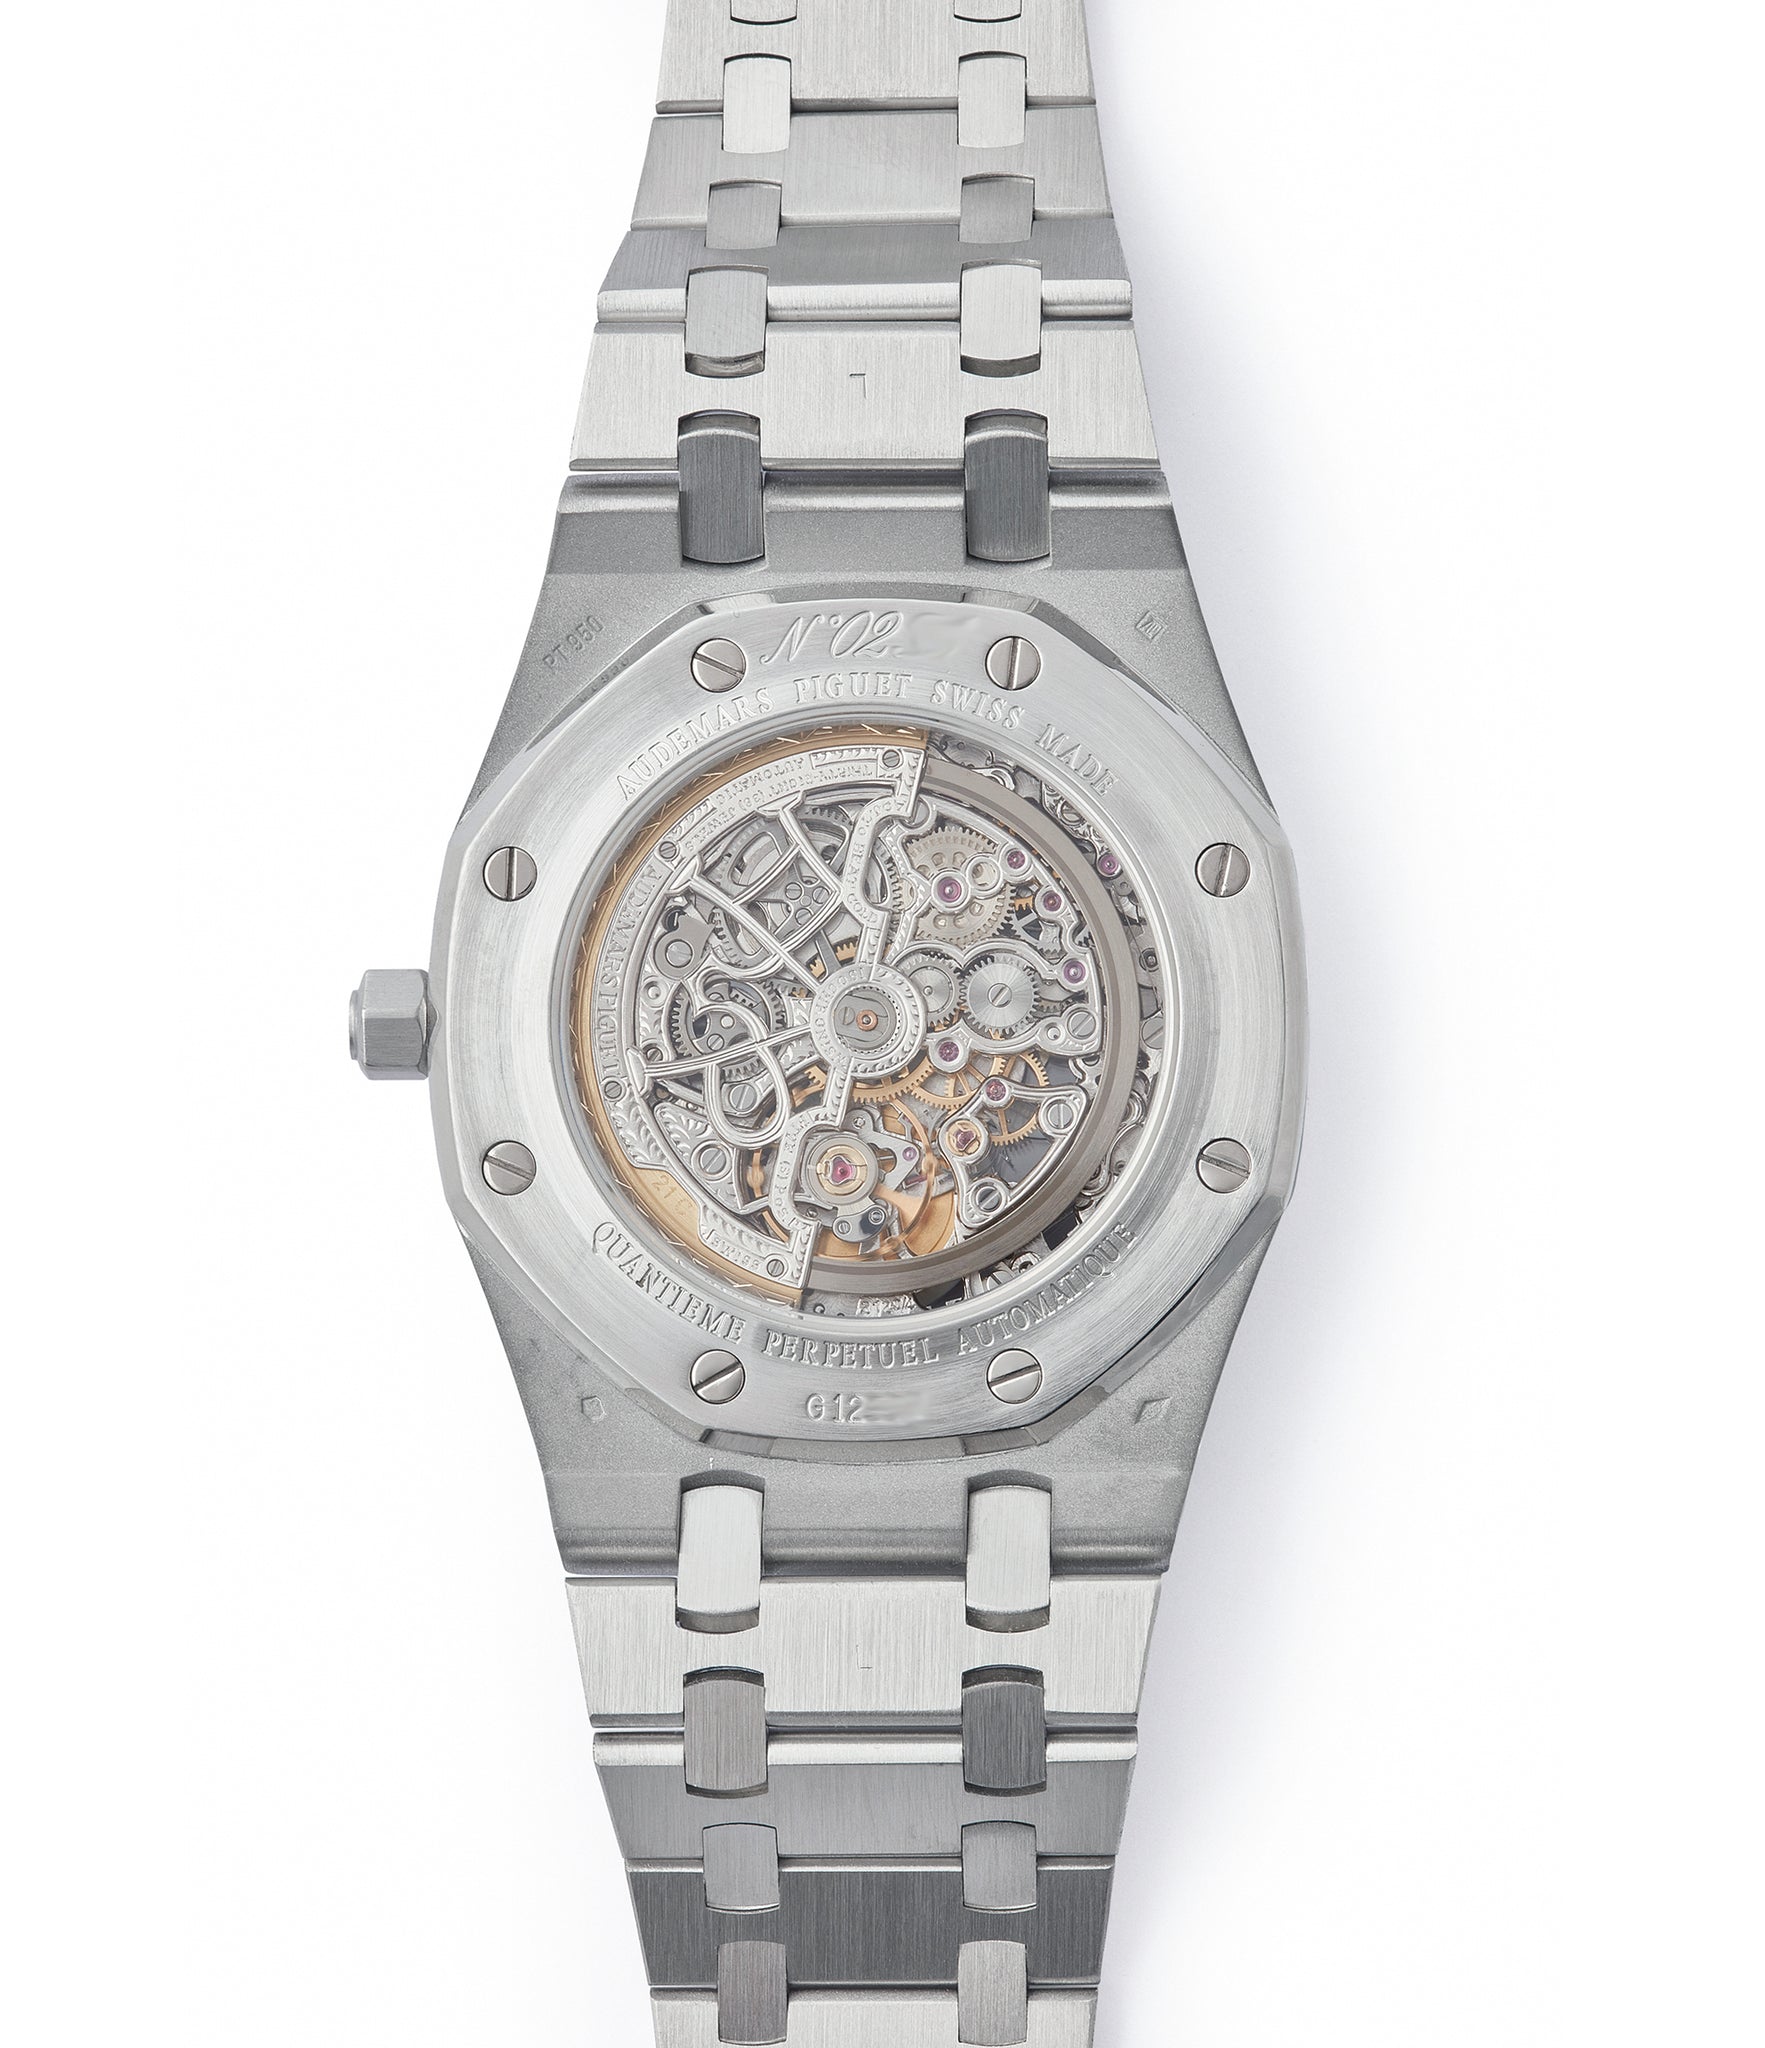 Audemars Piguet Quantieme Perpetual Royal Oak  25829PT perpetual calendar skeleton dial platinum full set pre-owned watch for sale online at A Collected Man London UK specialist of rare watches